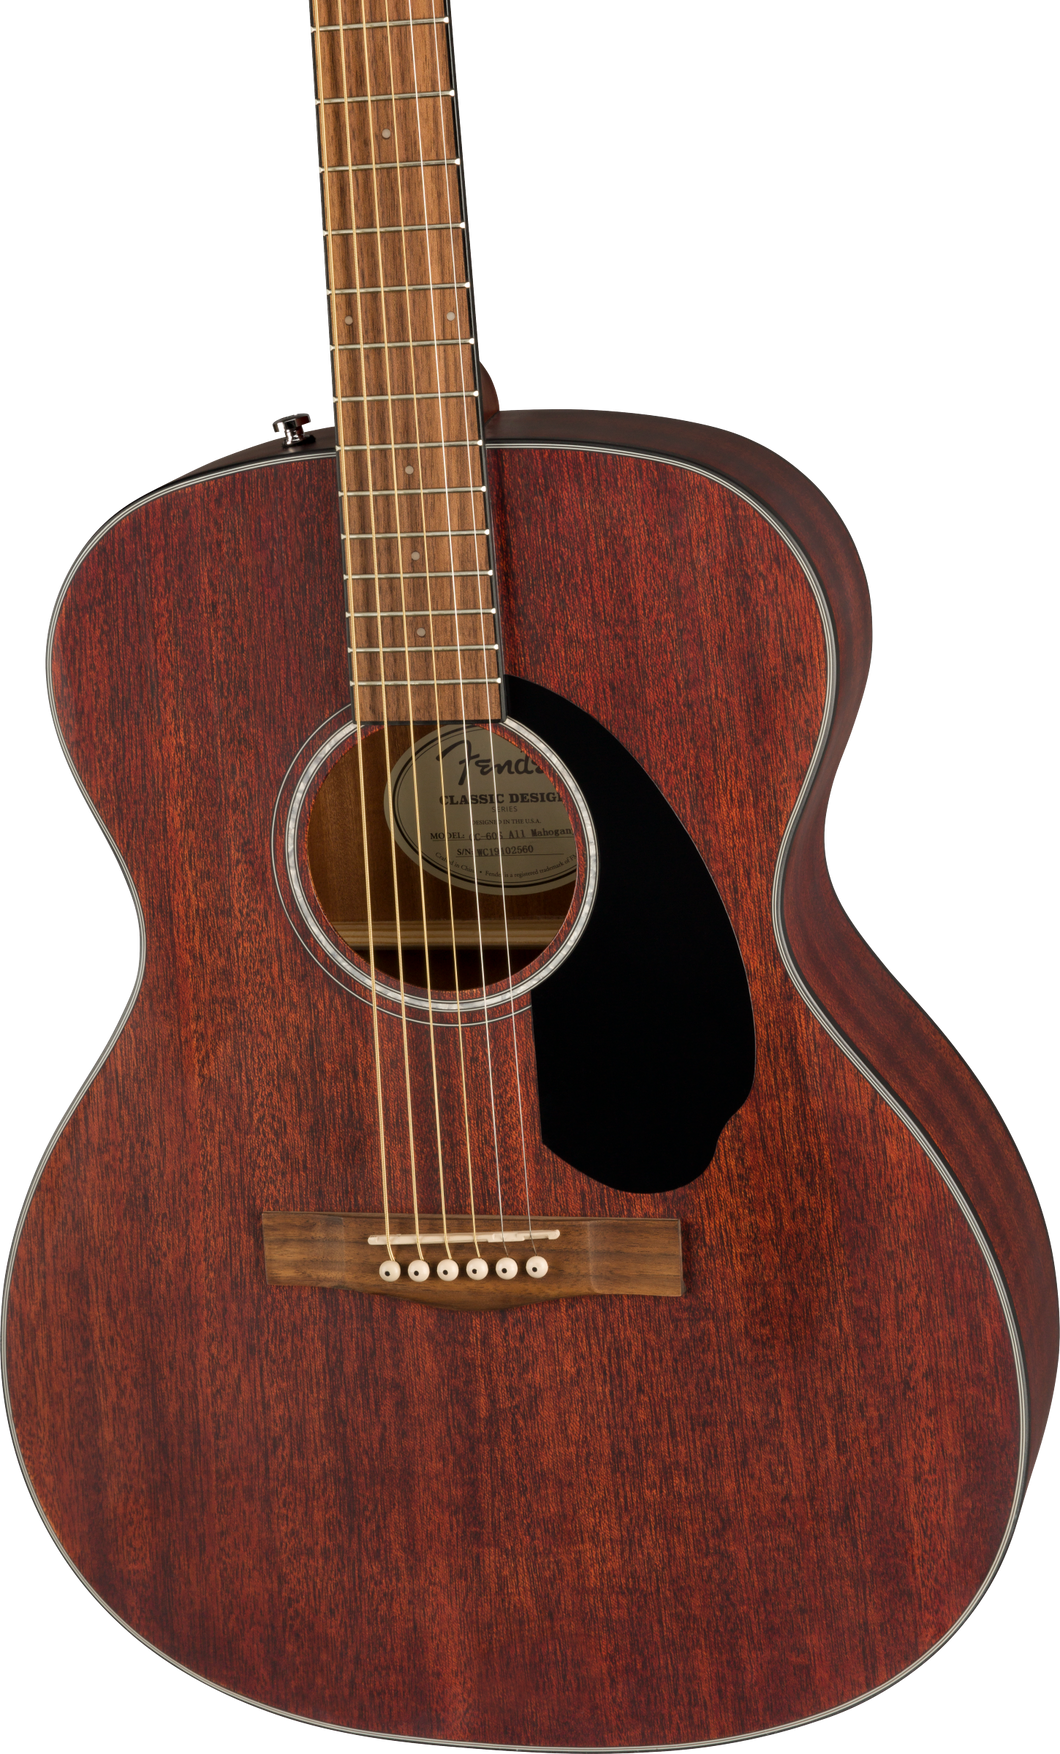 Fender CC-60S Concert Pack V2 All-Mahogany Acoustic Guitar WC22051411 - The Music Gallery